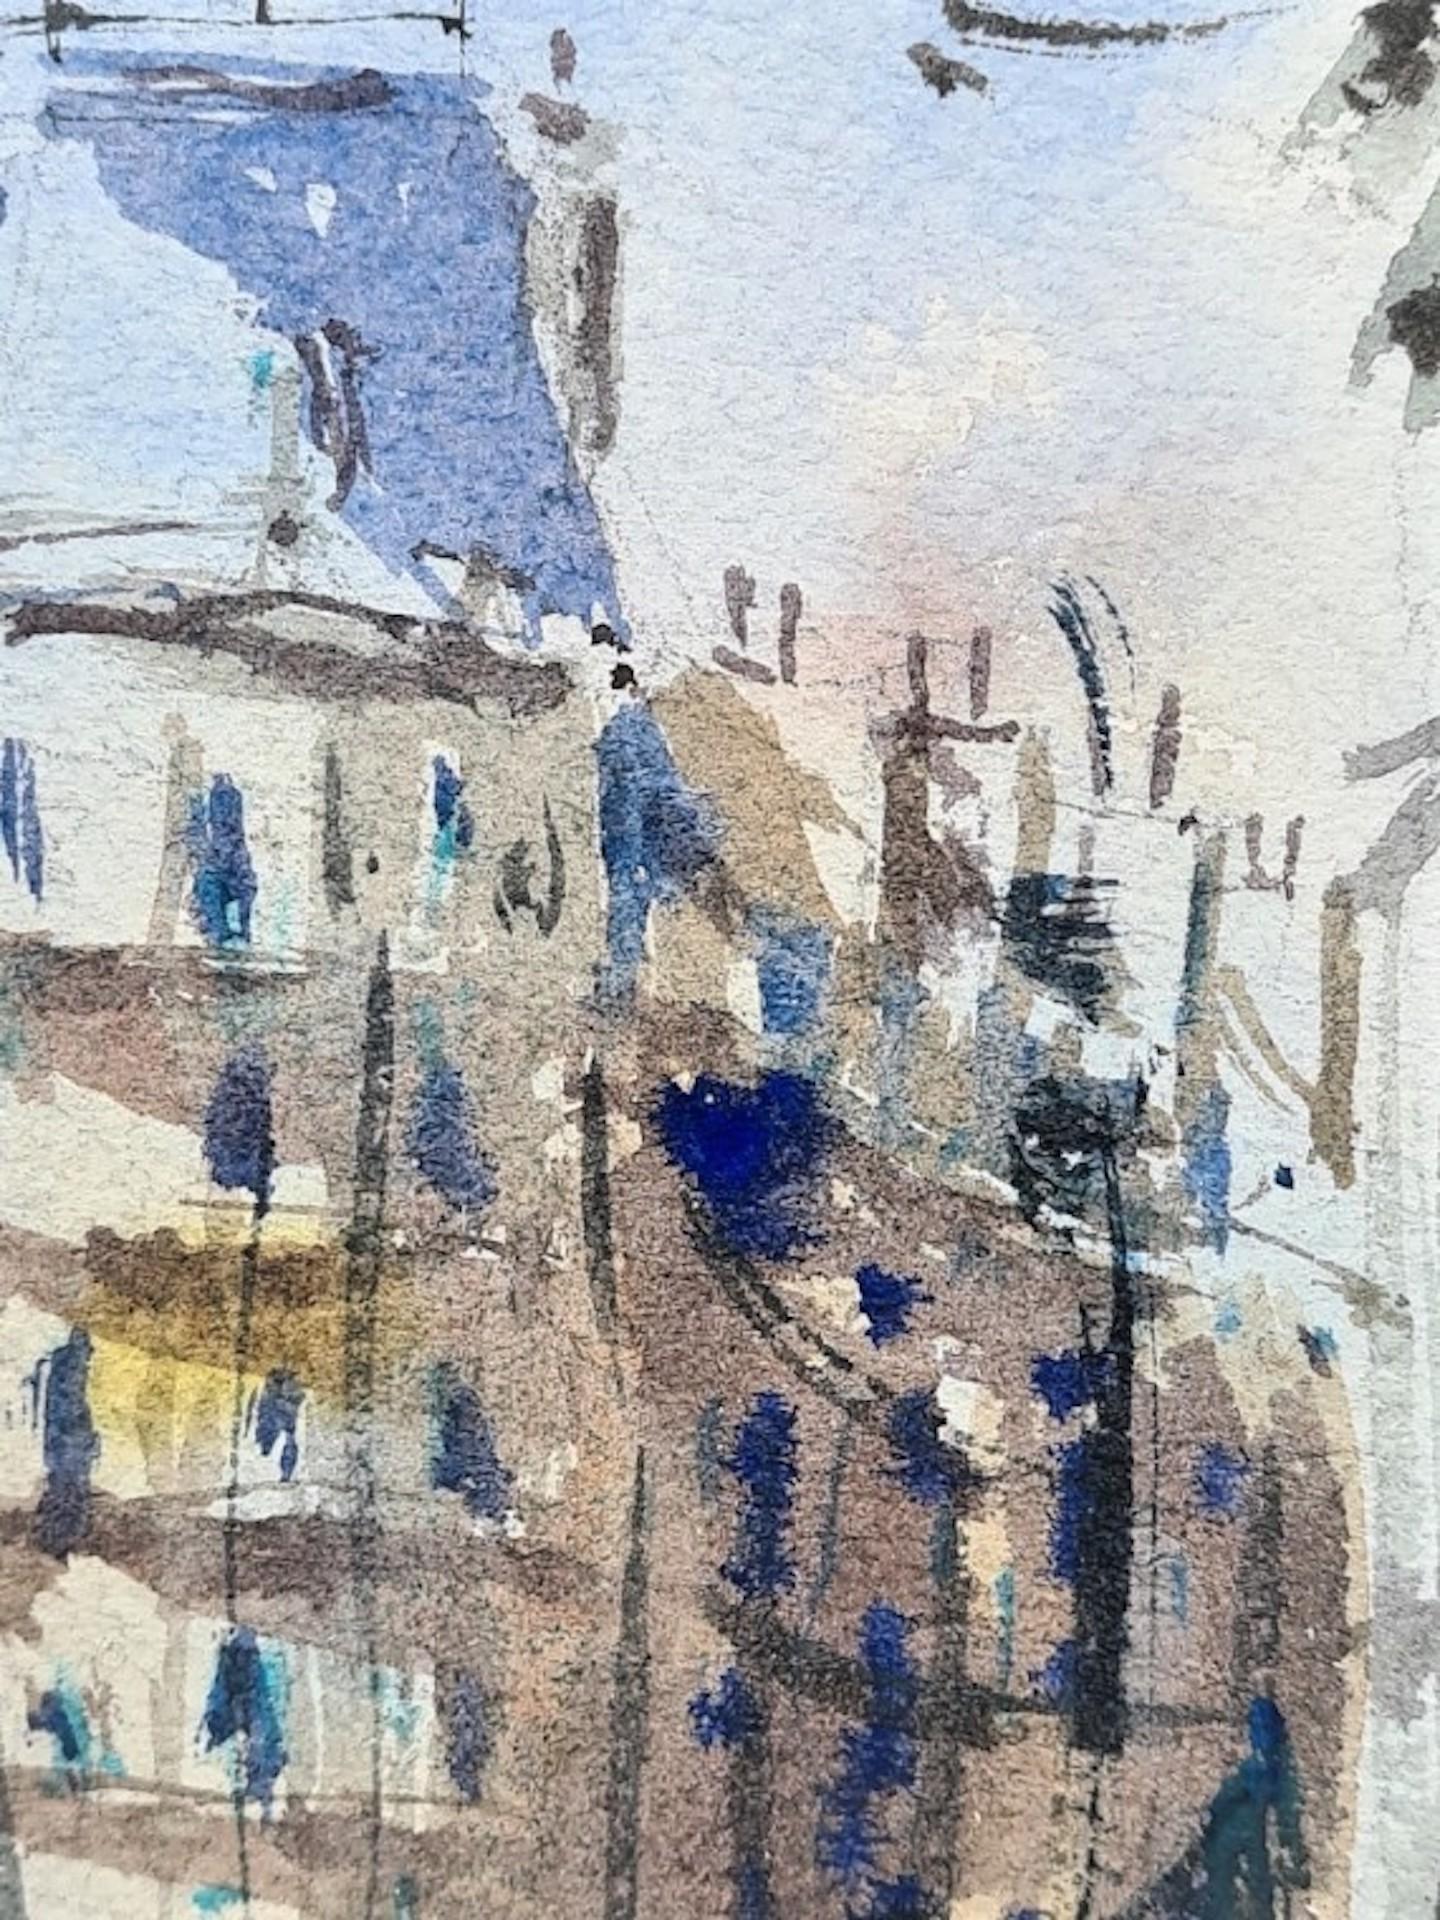 Leicester Square, London By Max Panks [2021]
original

Watercolour on Paper

Image size: H:24.5 cm x W:16.5 cm

Complete Size of Unframed Work: H:29 cm x W:19.5 cm x D:0.1cm

Sold Unframed

Please note that insitu images are purely an indication of